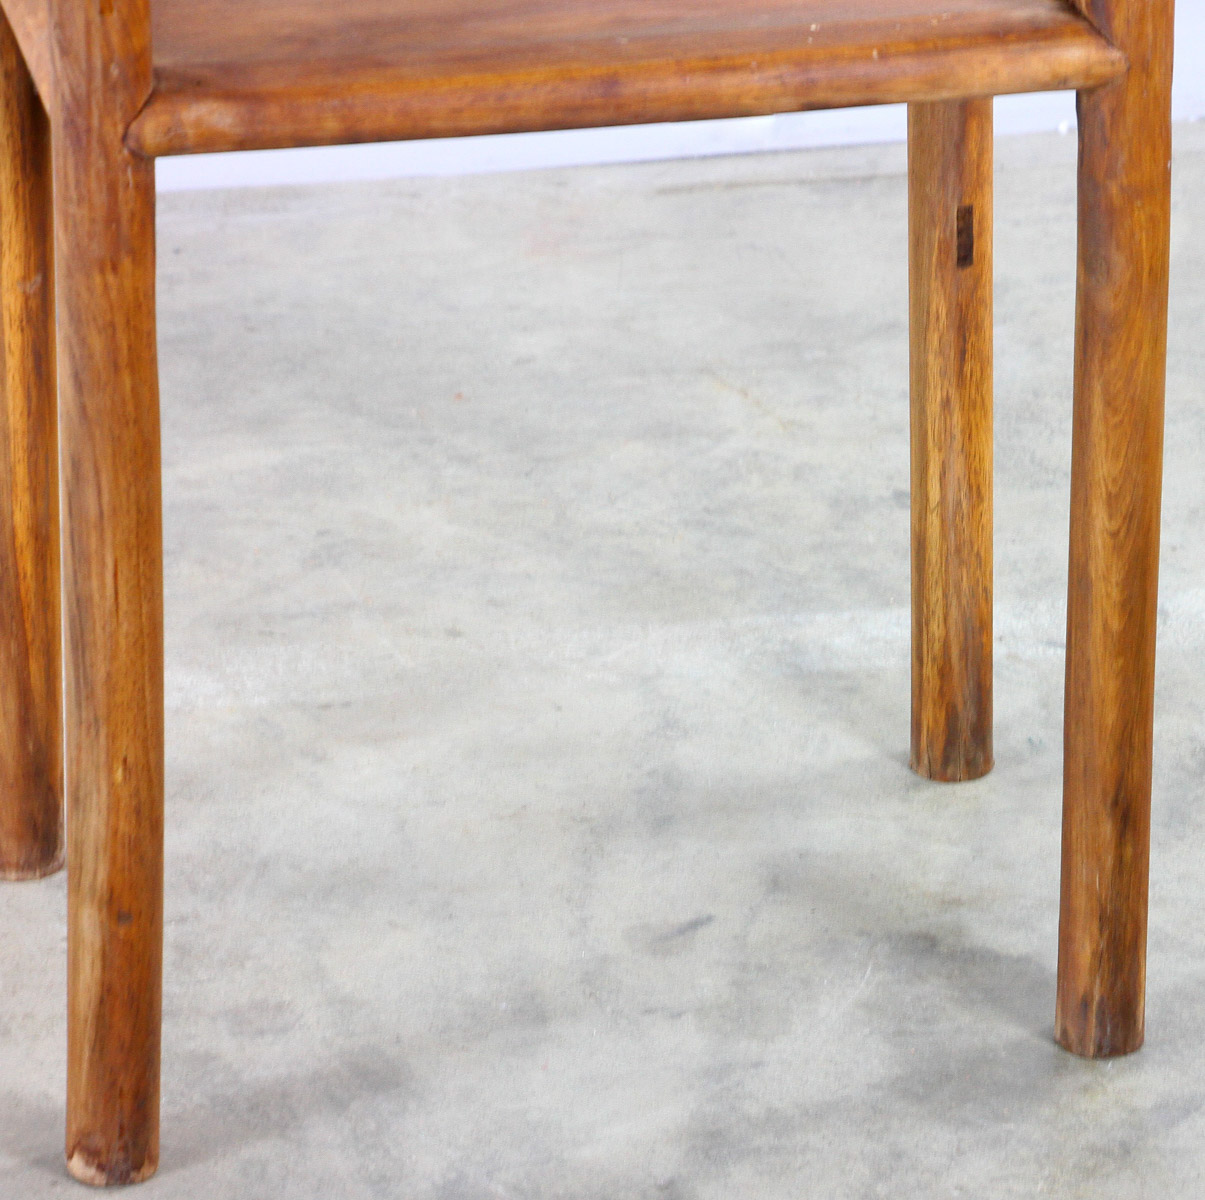 Small Chinese hardwood table, 31" x 13" x 16". - Image 4 of 6